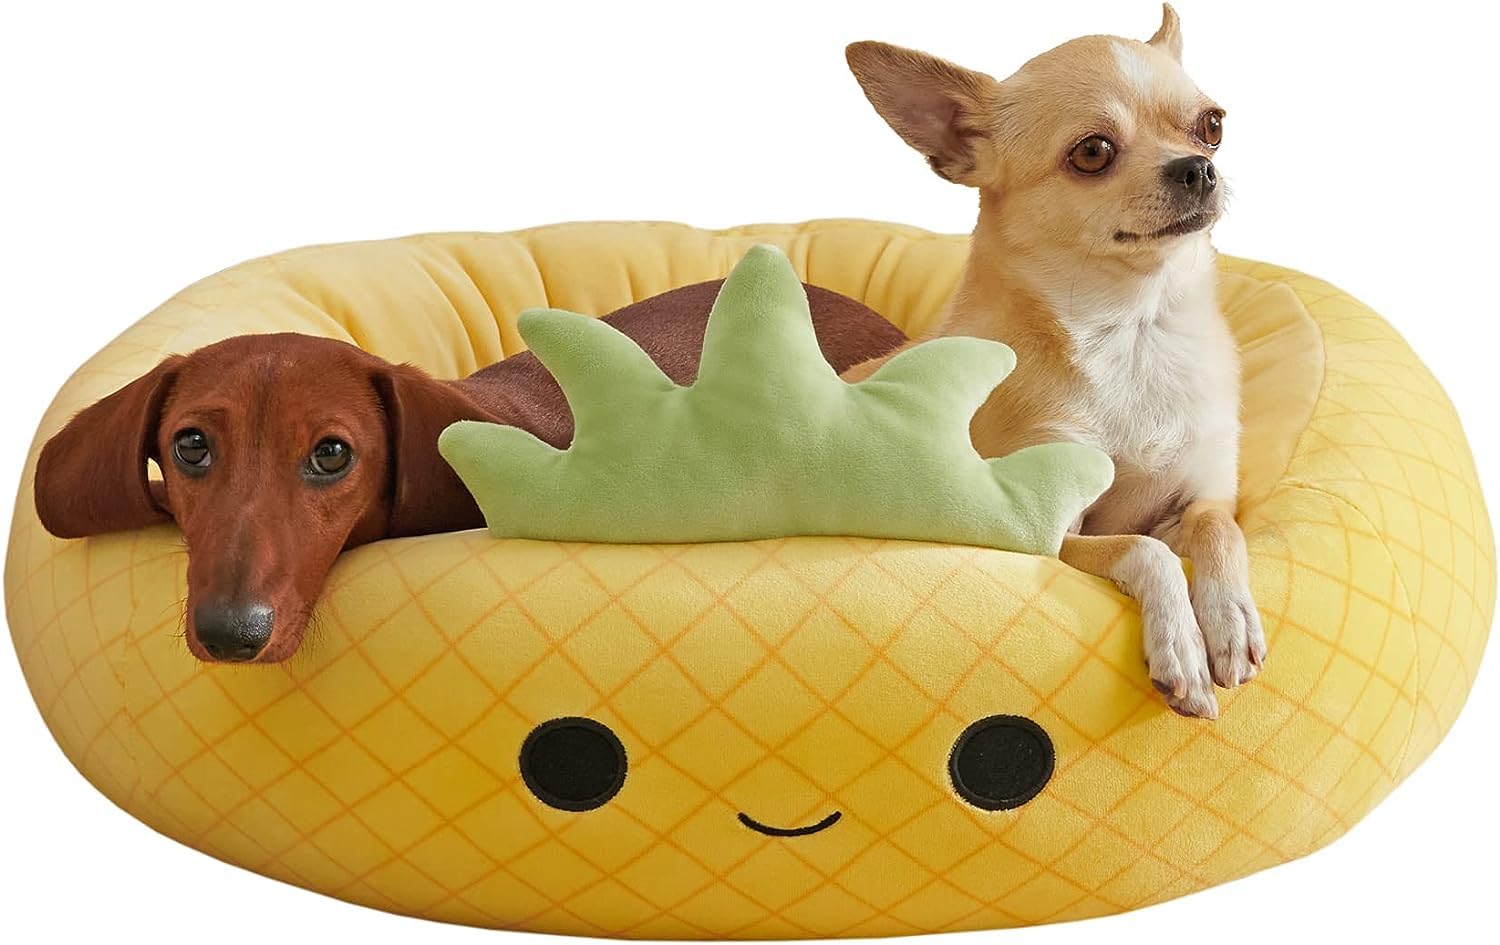 24" Squishmallows Maui Pineapple Ultrasoft Plush Pet Bed $30.20 + Free Shipping w/ Prime or on $35+